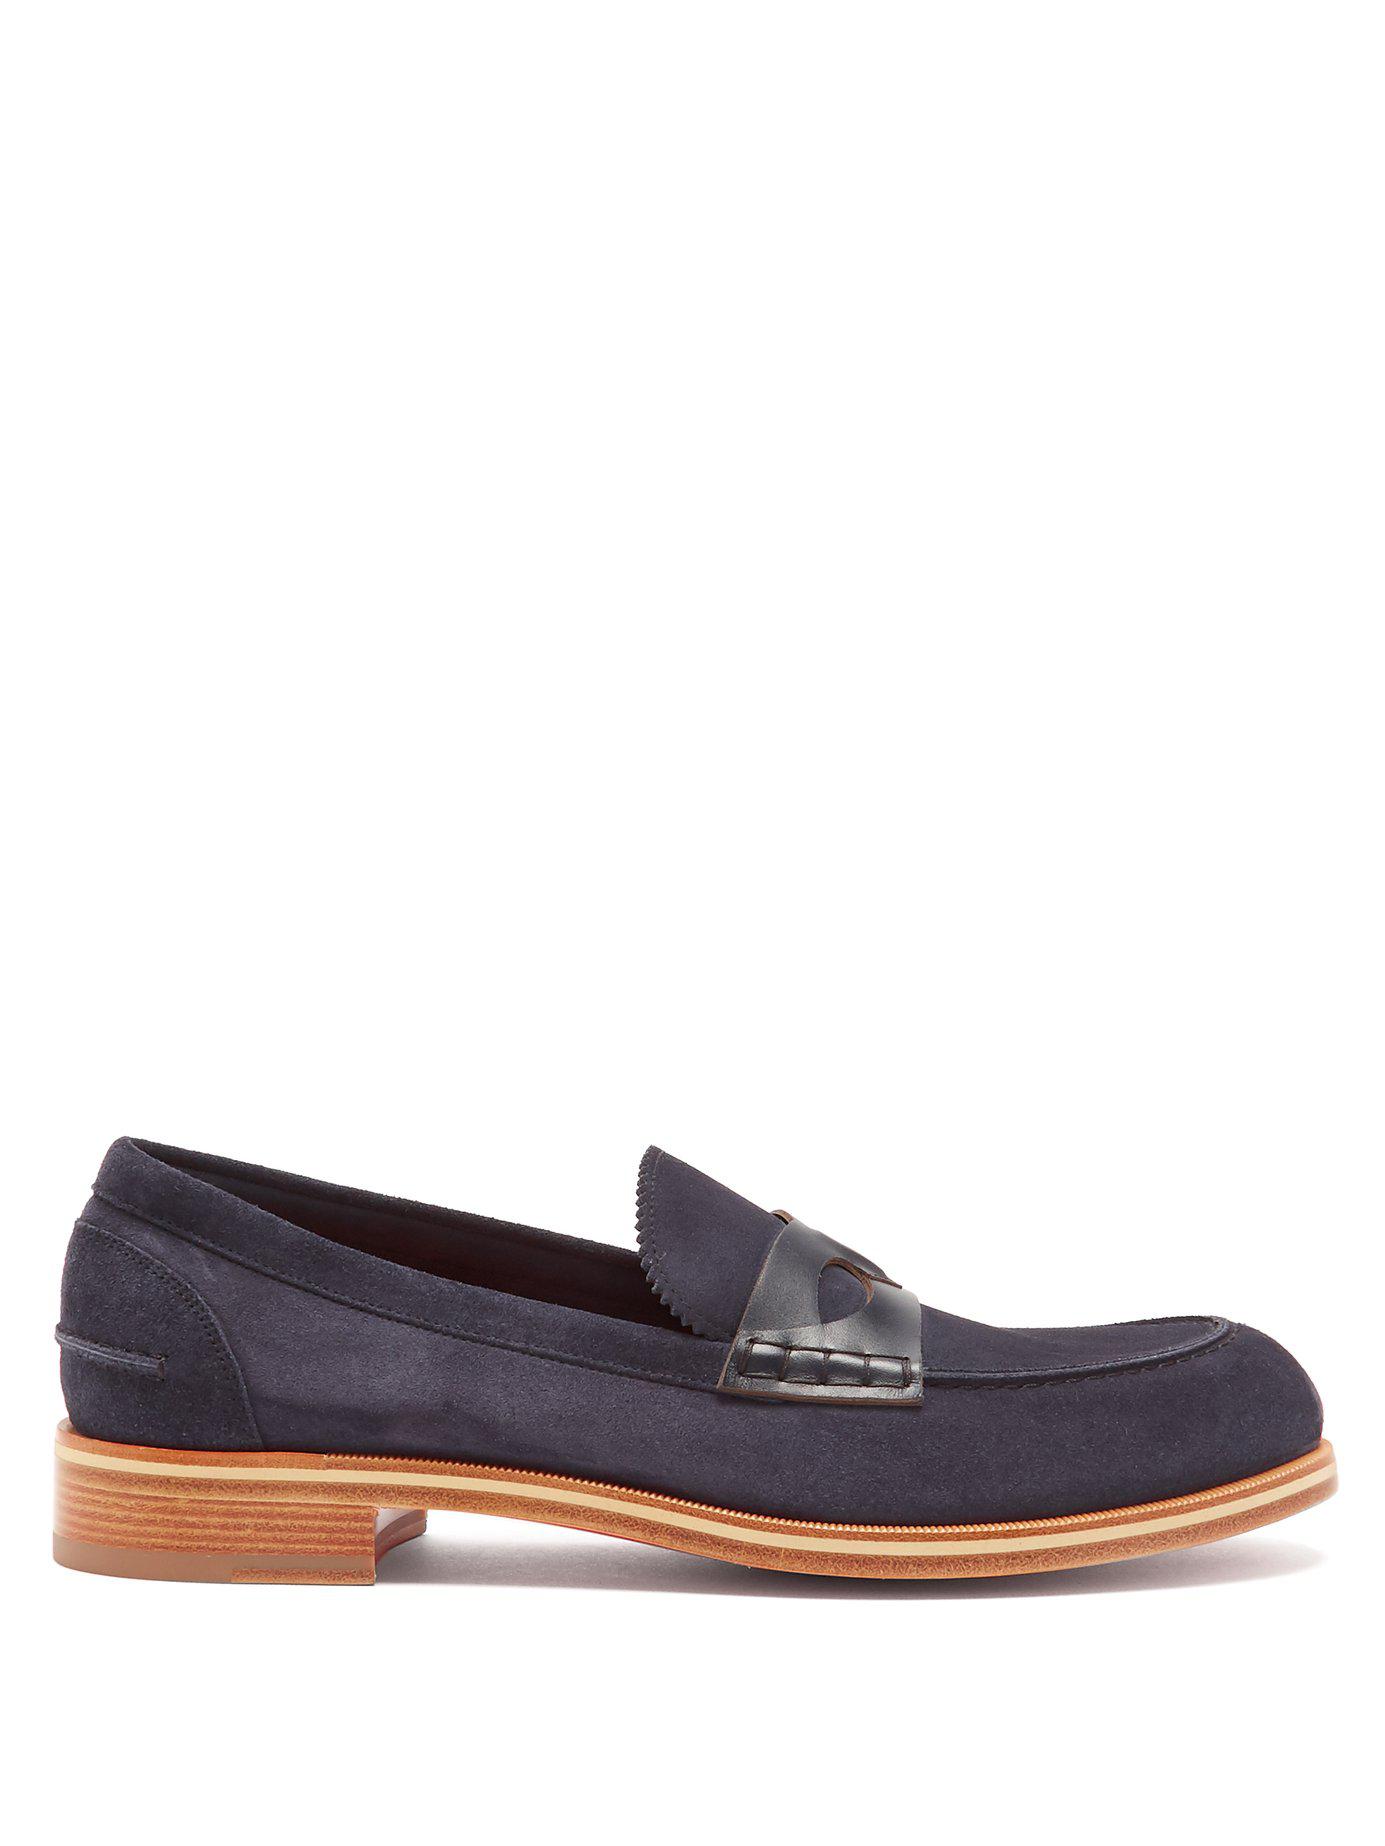 Christian Louboutin Montezumolle Suede Penny Loafers in Navy (Blue 